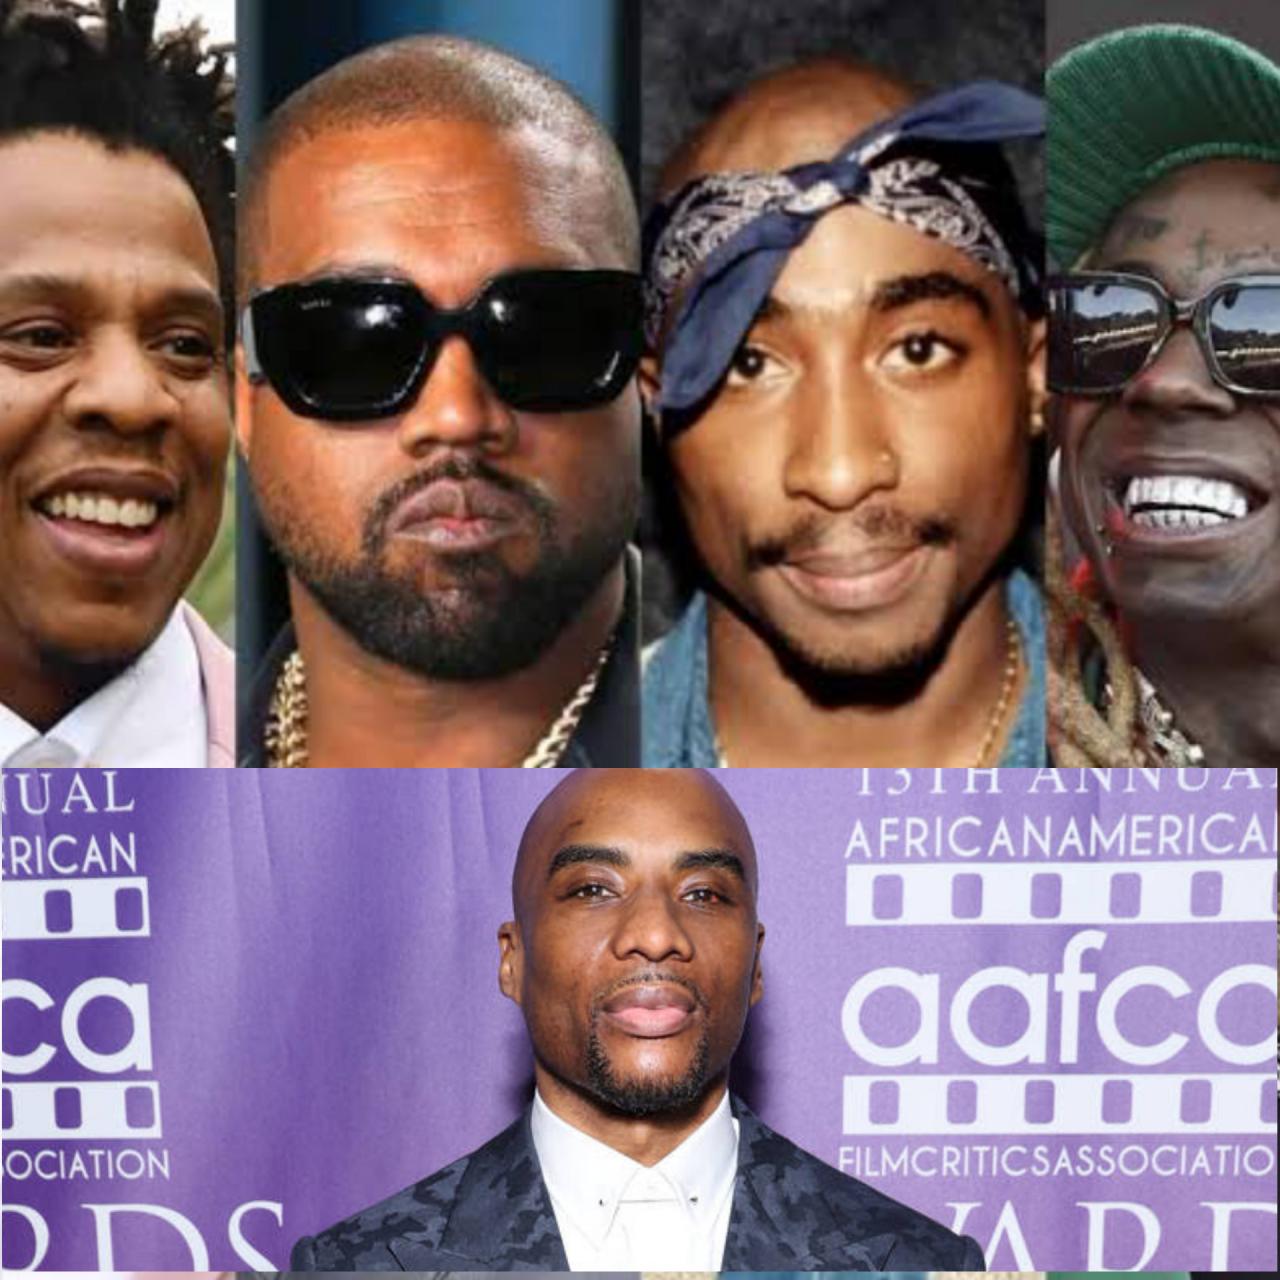 "Kanye, Jay-Z, 2Pac and Lil Wayne" - Media personality, Charlamagne Tha God lists four most influential rappers of all time